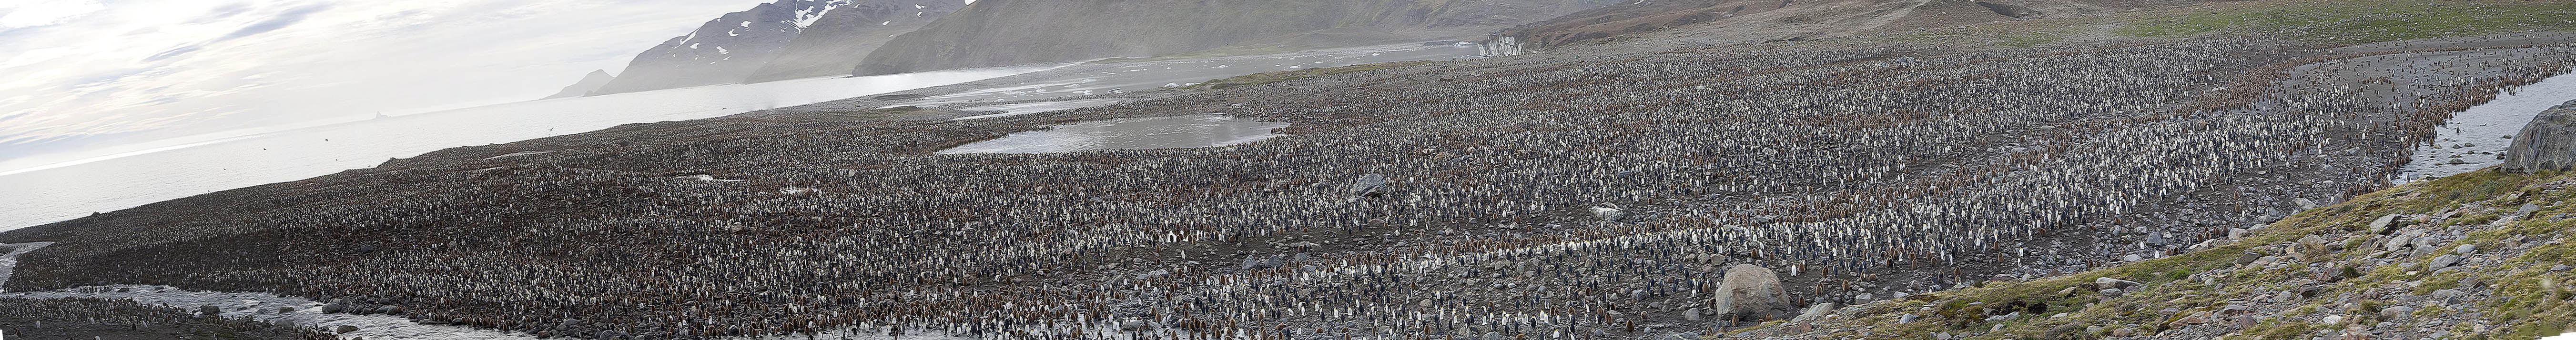 Largest Colony of King Penguins in the world in panorama